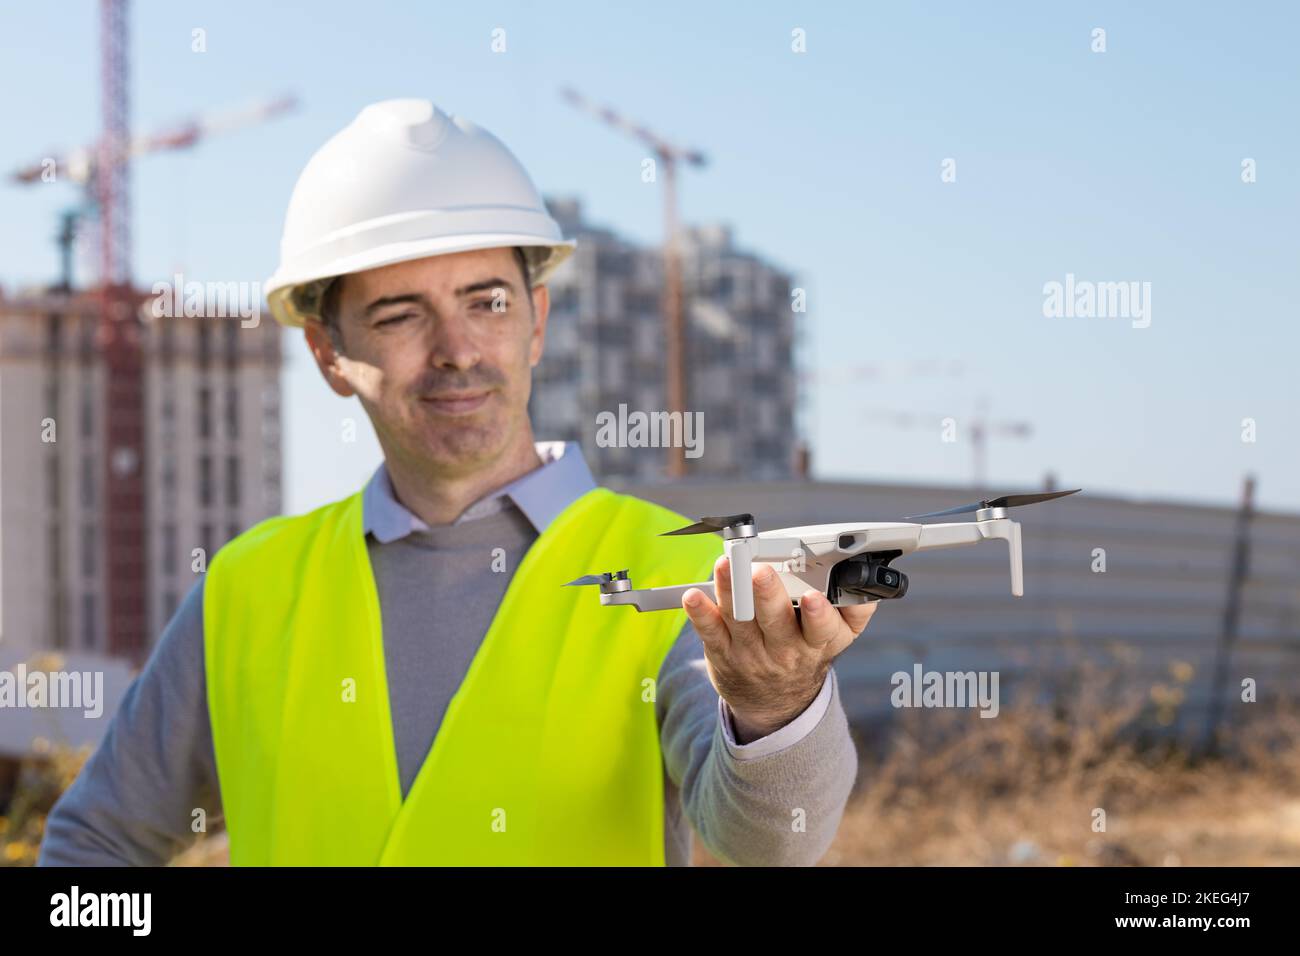 Man launches a quadcopter. An engineer flies a drone next to a construction site. Concept - construction observation with a drone.  Construction crane Stock Photo